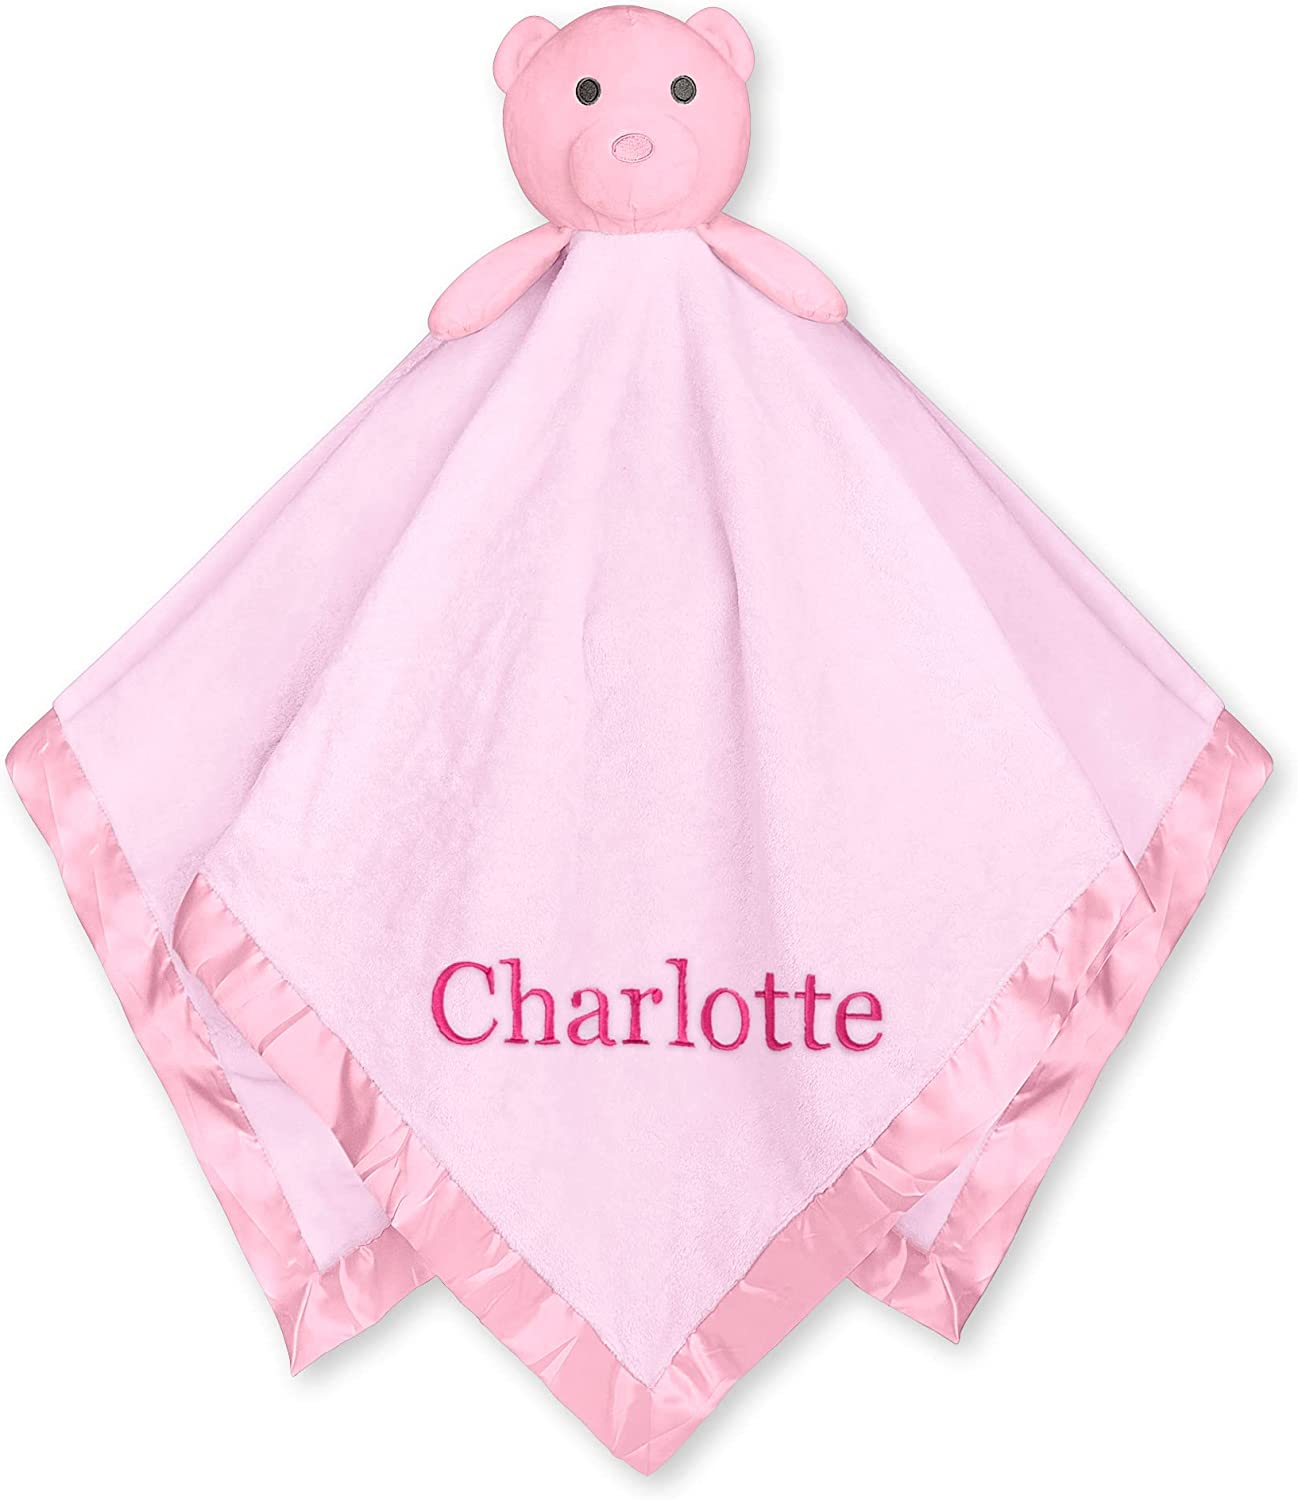 Personalized Baby Blankets - Unisex Teddy Bear Baby Blankets